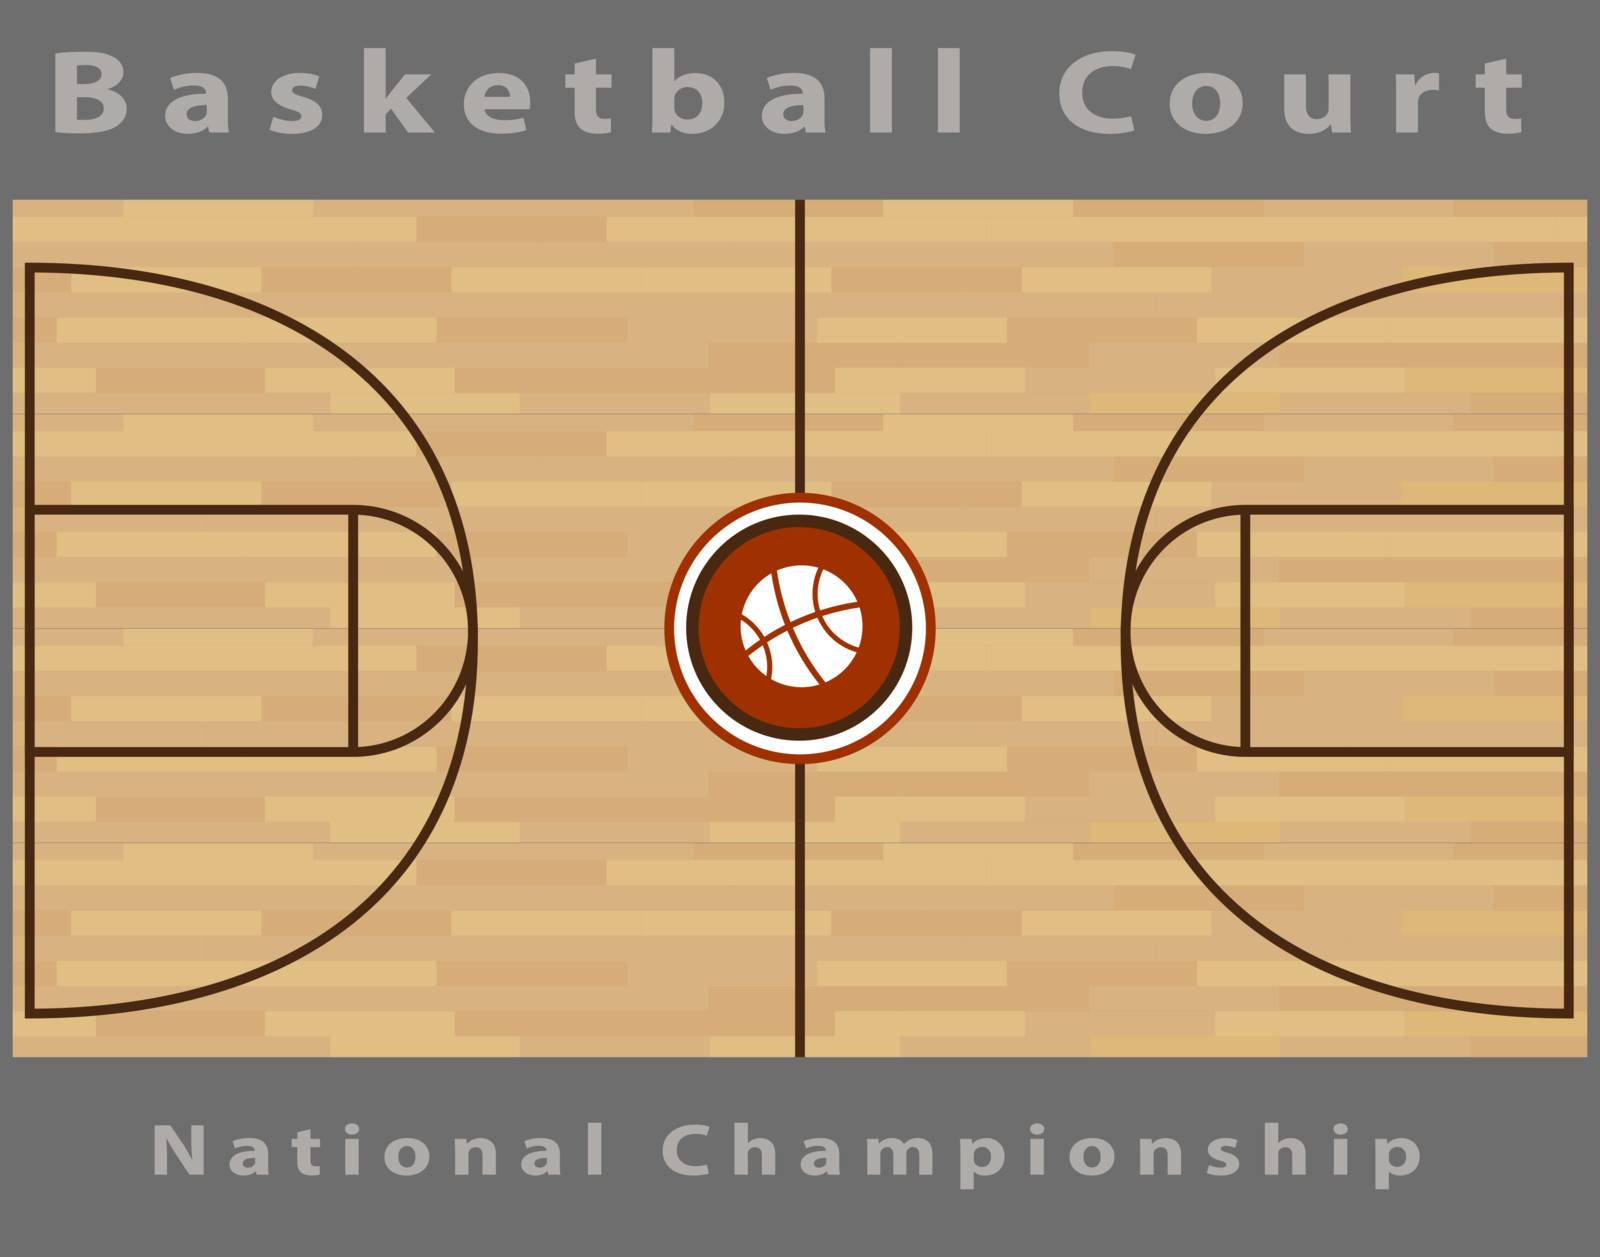 Basketball Court by cteconsulting